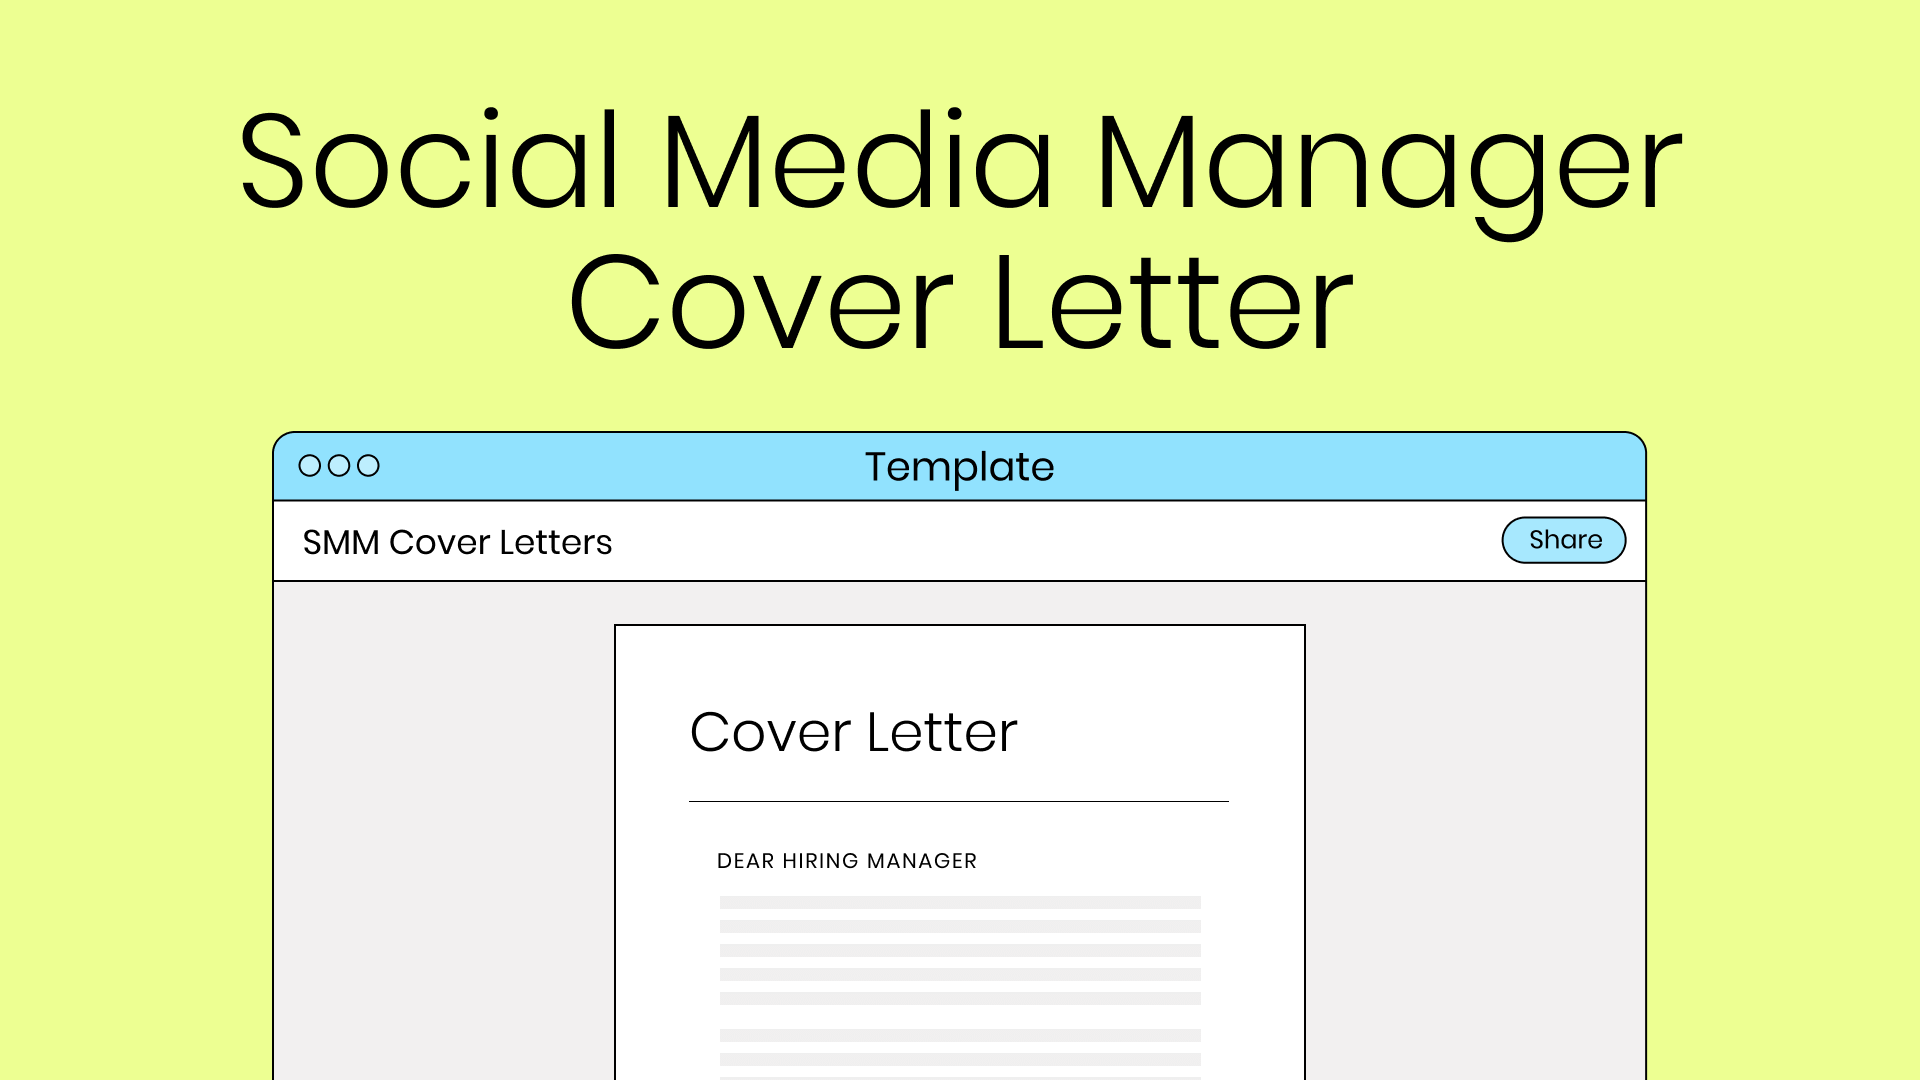 Decorative thumbnail image for the Later social media cover letter template.